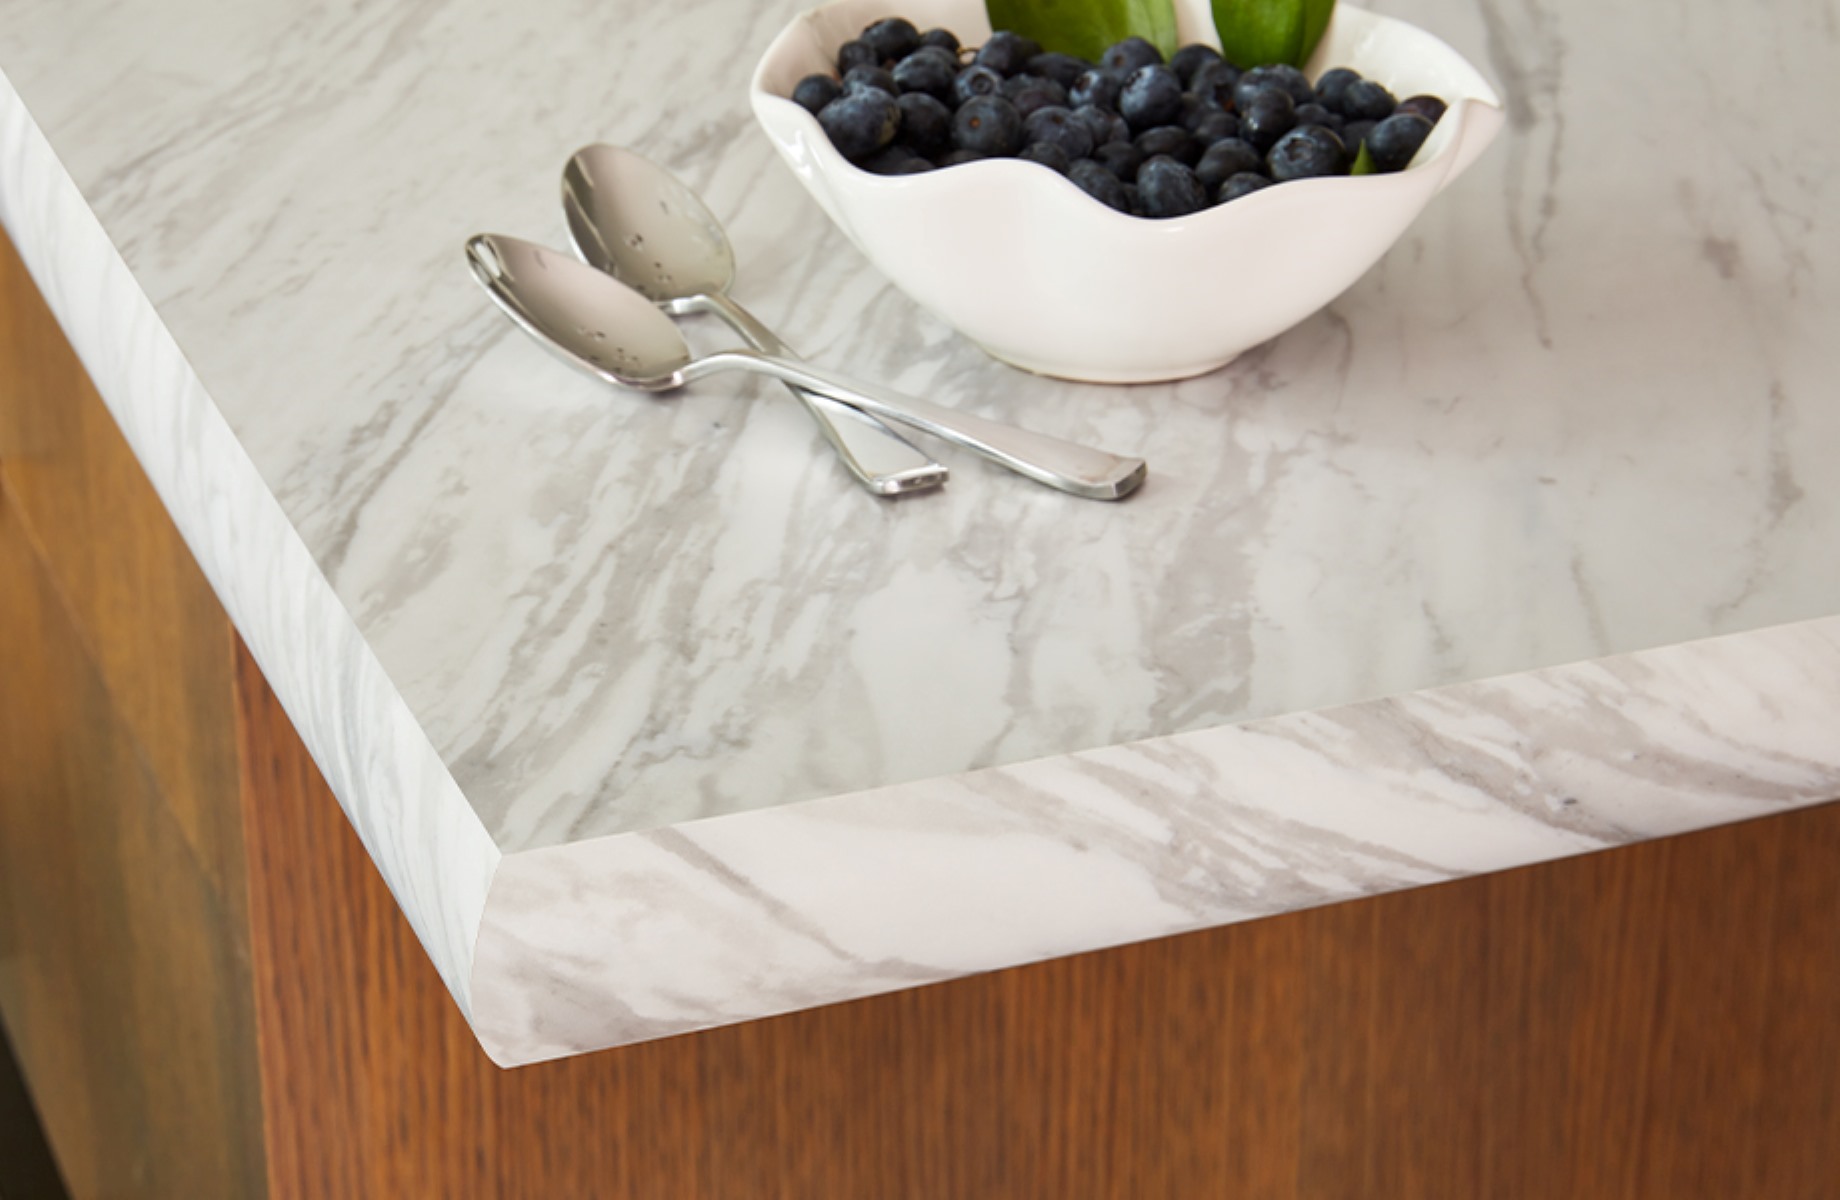 Where To Buy Formica Countertops